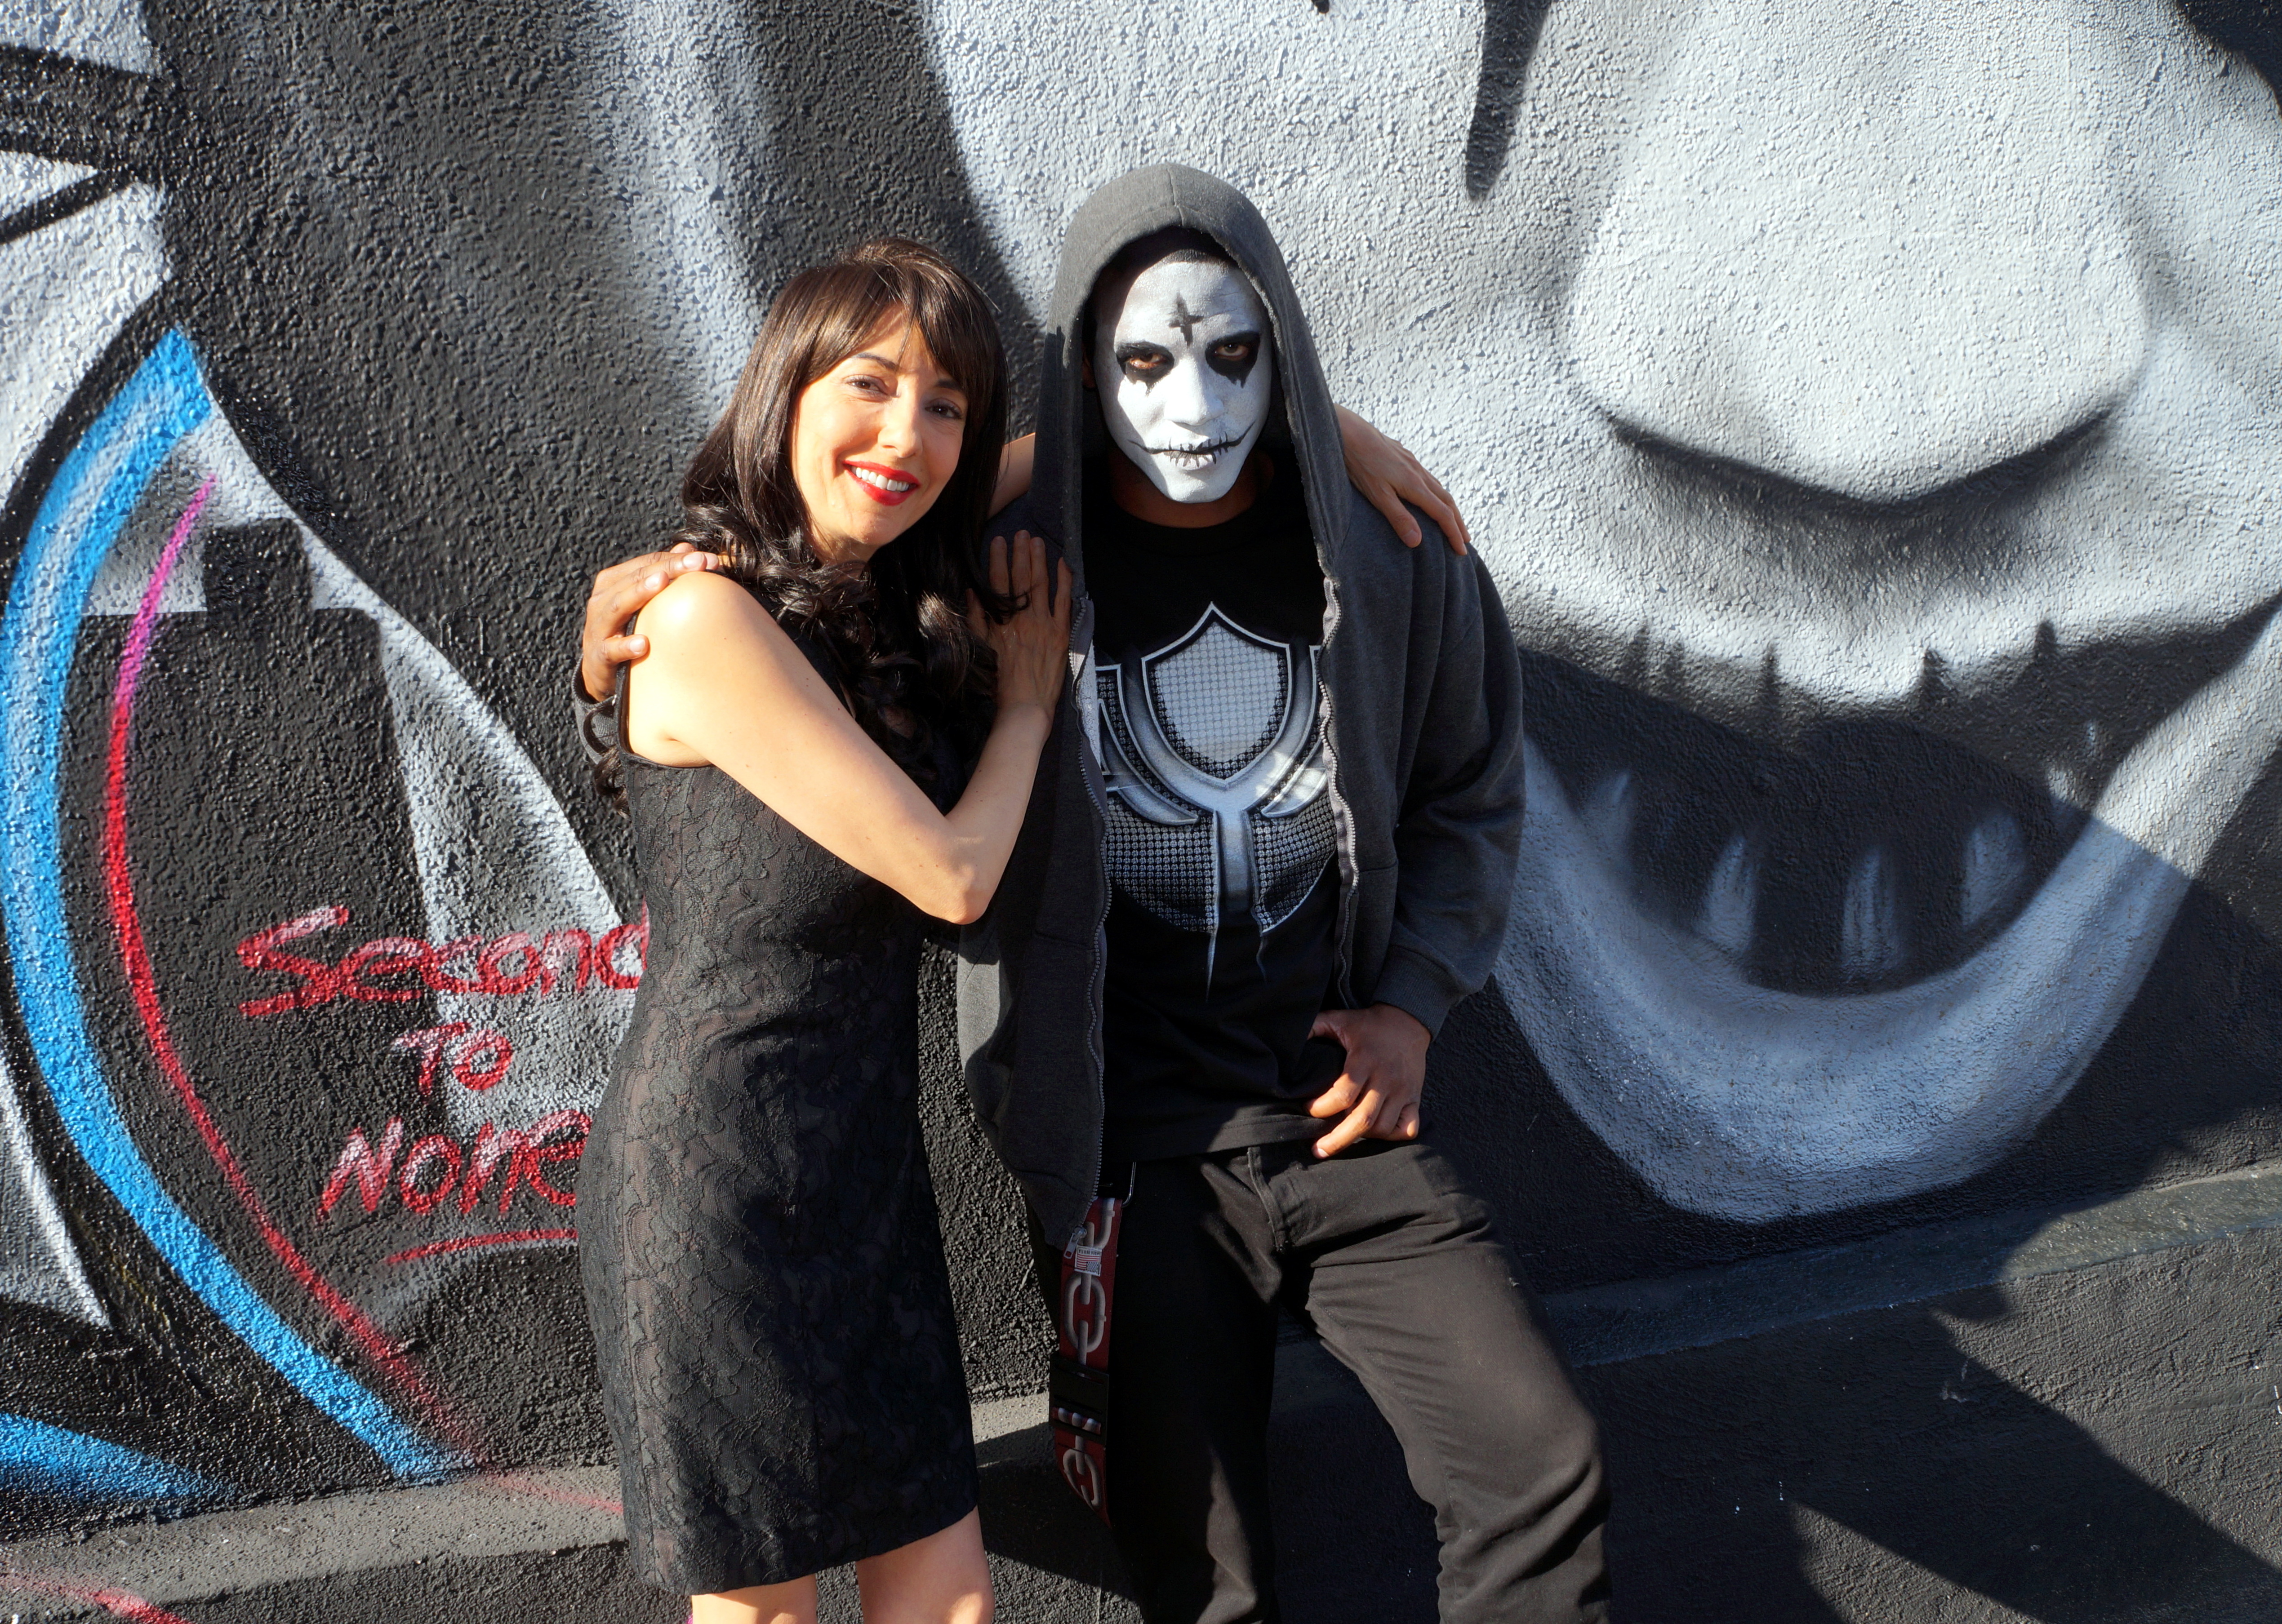 Luciana Lagana with The Purge: Anarchy actor Emanuel Powell at Skate for Kids event of the Garage Boardshop Youth Center in East Los Angeles on 08/09/2014